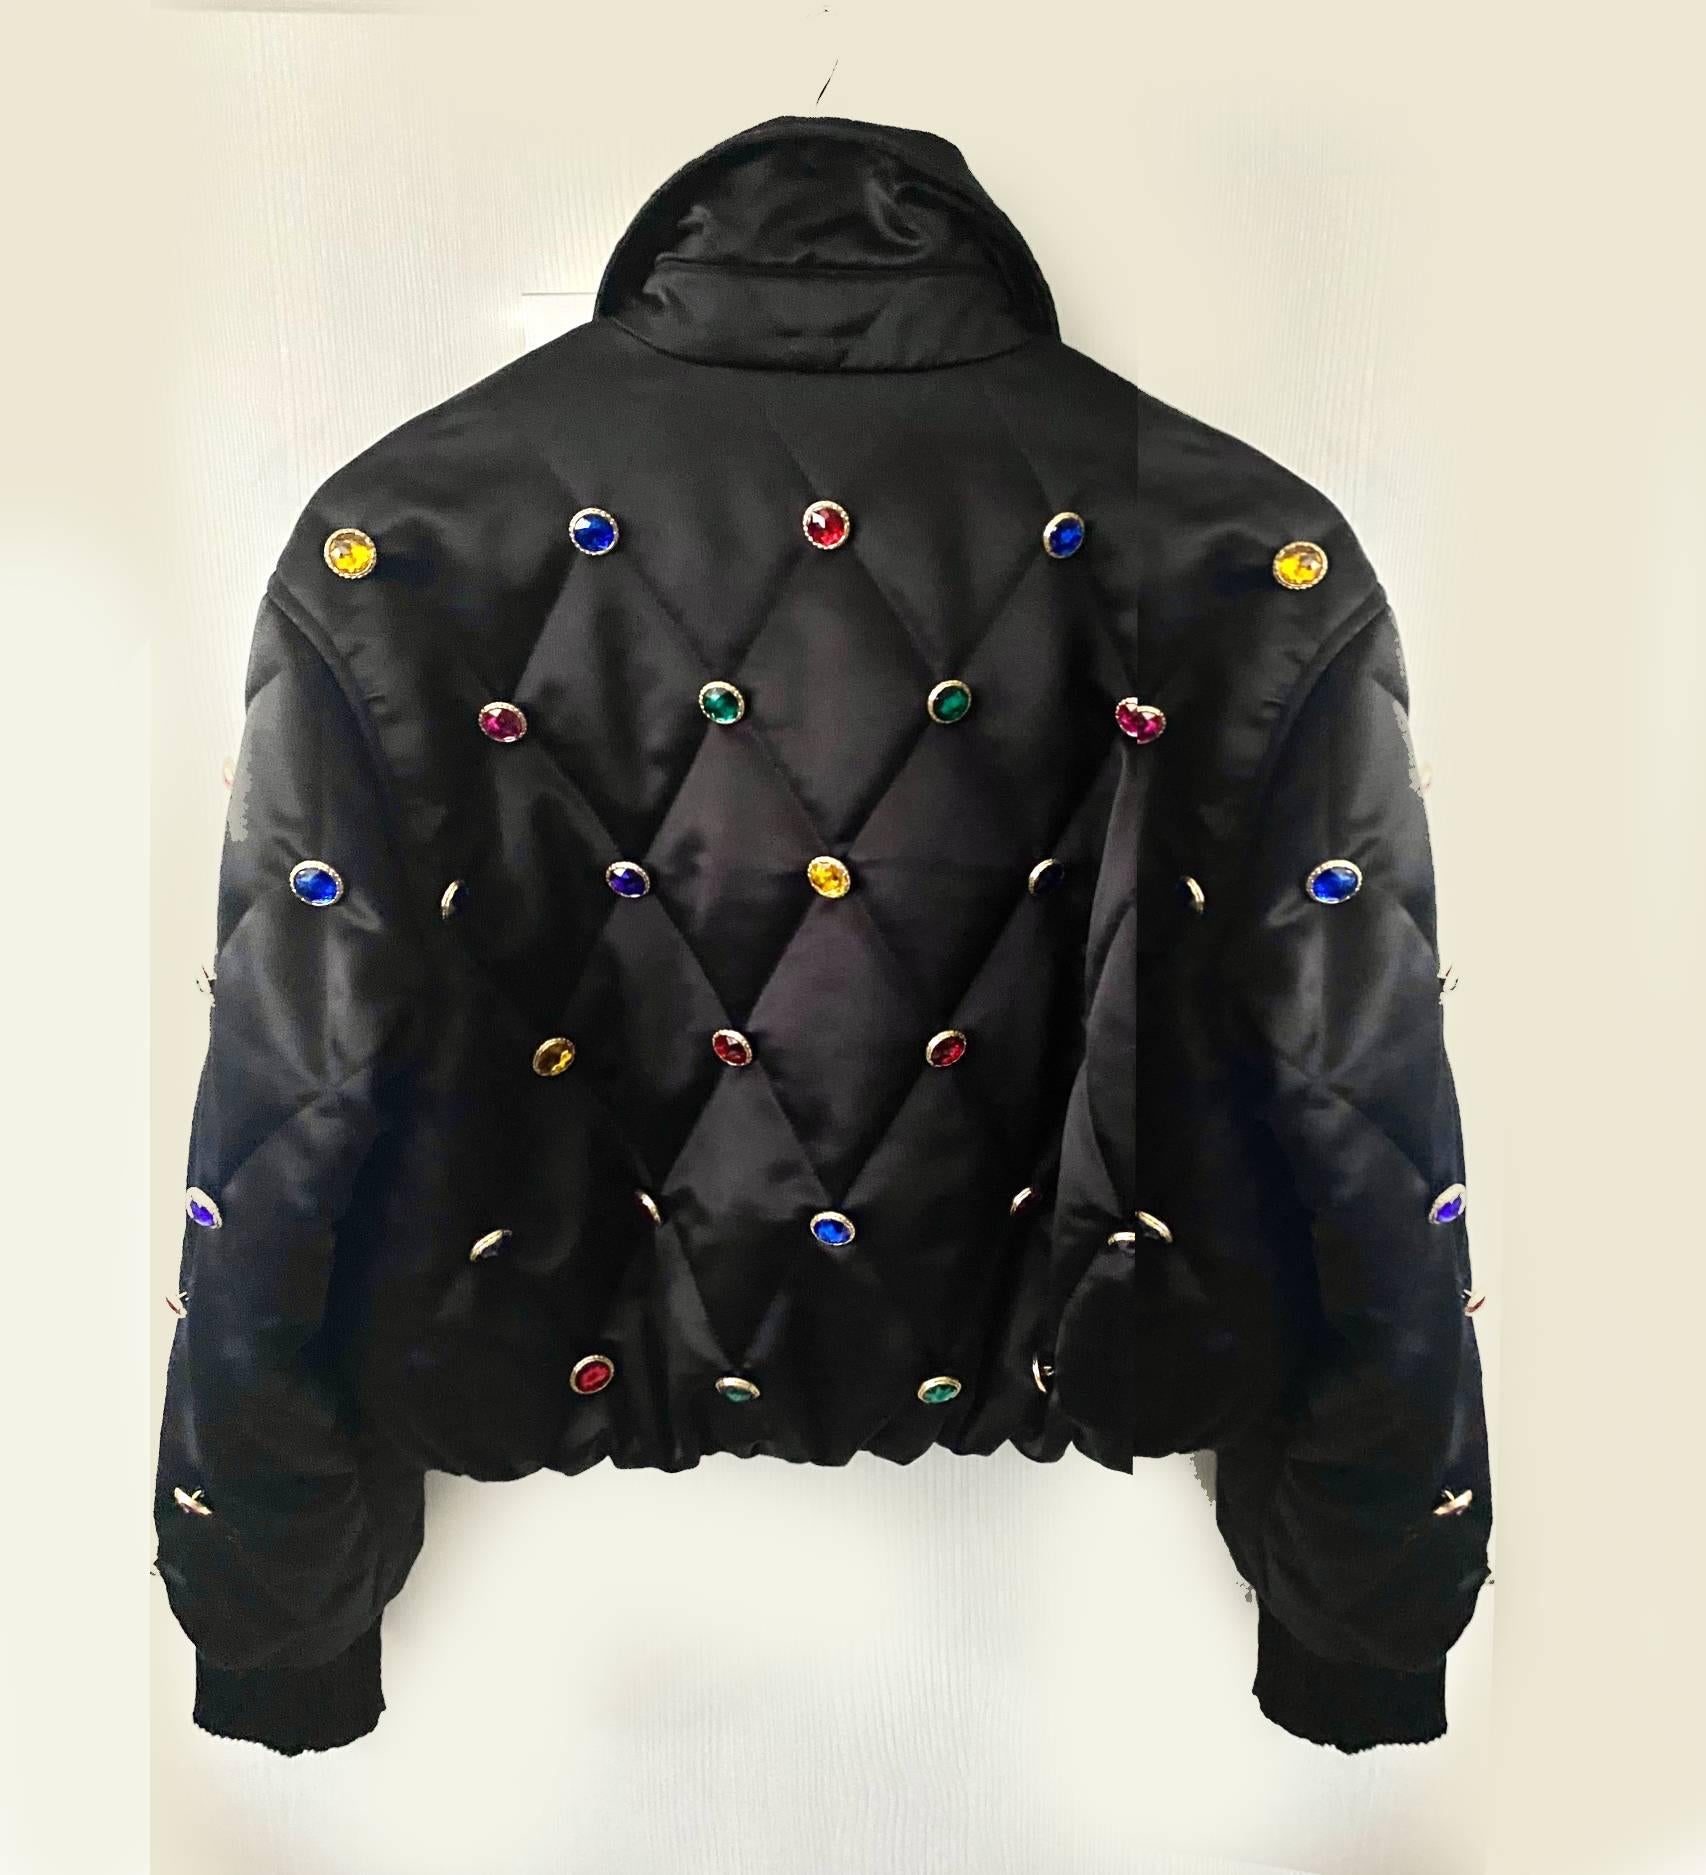 Escada Sport black colored gems gold tone metal buttons bomber crop jacket, frontal button closure, 2 pockets.  satin lining 

Condition: 1990s, excellent like new

Size: 42 IT - 10 UK - 2-4 USA

Measurements
Pit To Pit: 19